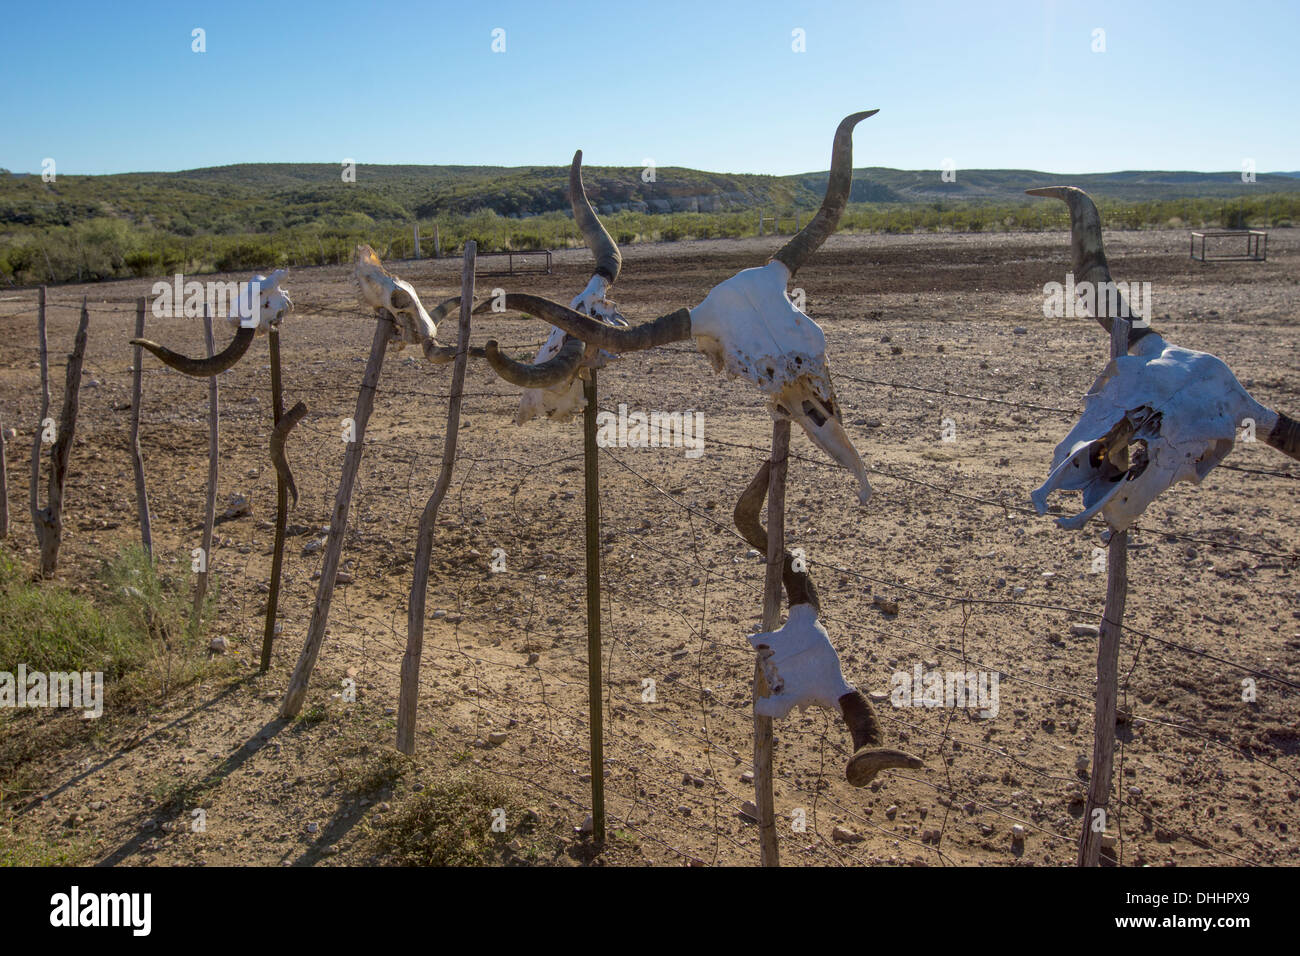 Longhorn cow skulls on display on a ranch in West Texas. Stock Photo